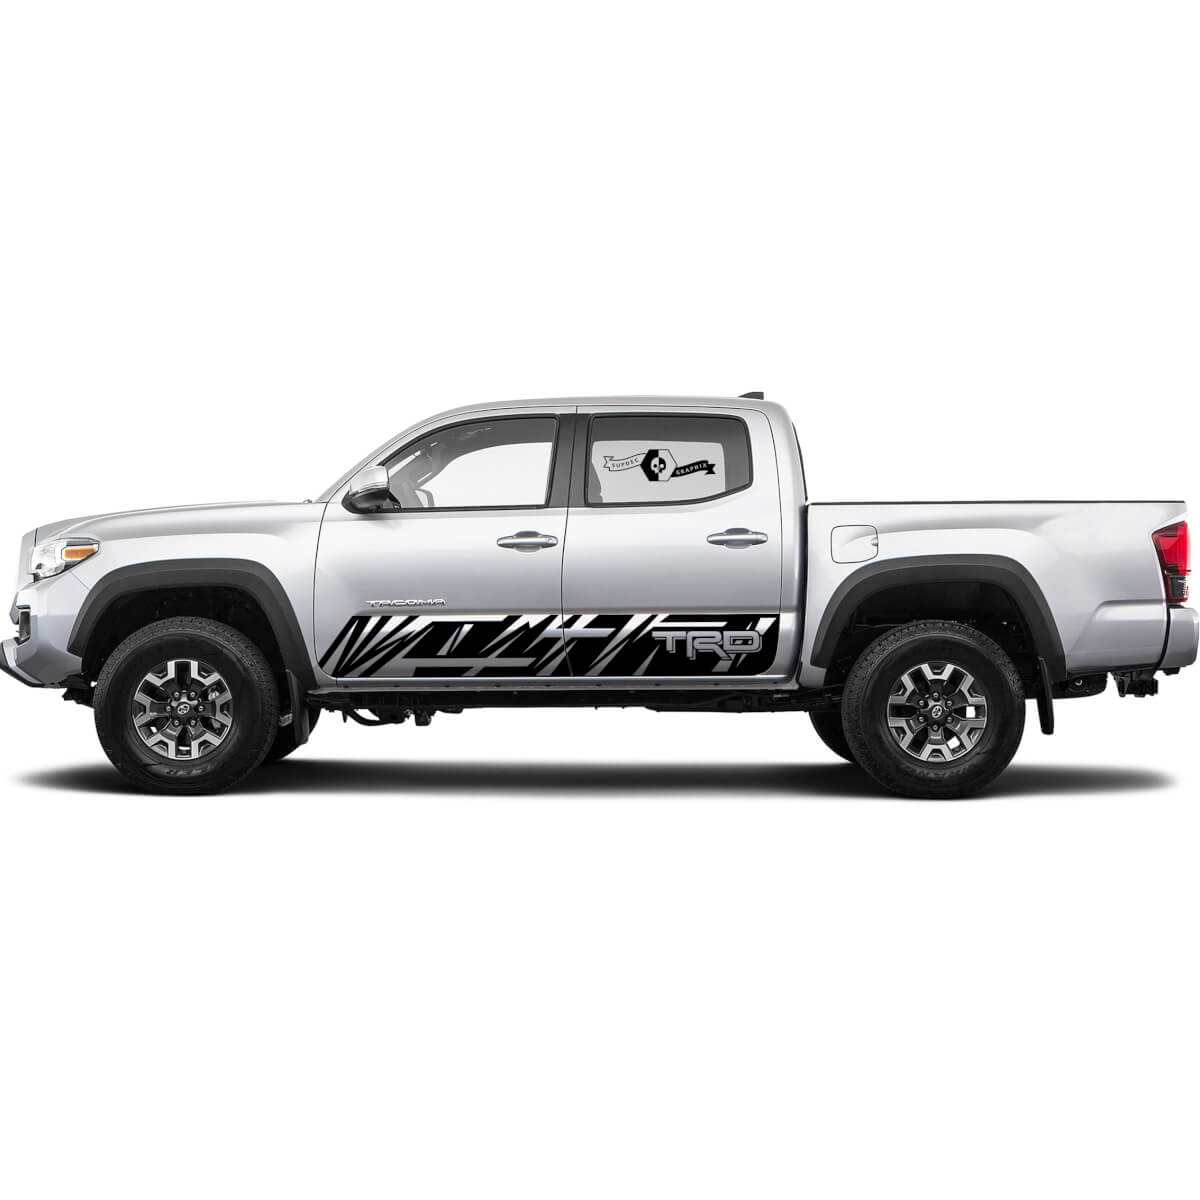 TRD Toyota Racing Style for Rocker Panel Decals Stickers for Tacoma FJ Cruiser Tundra Hilux 4Runner